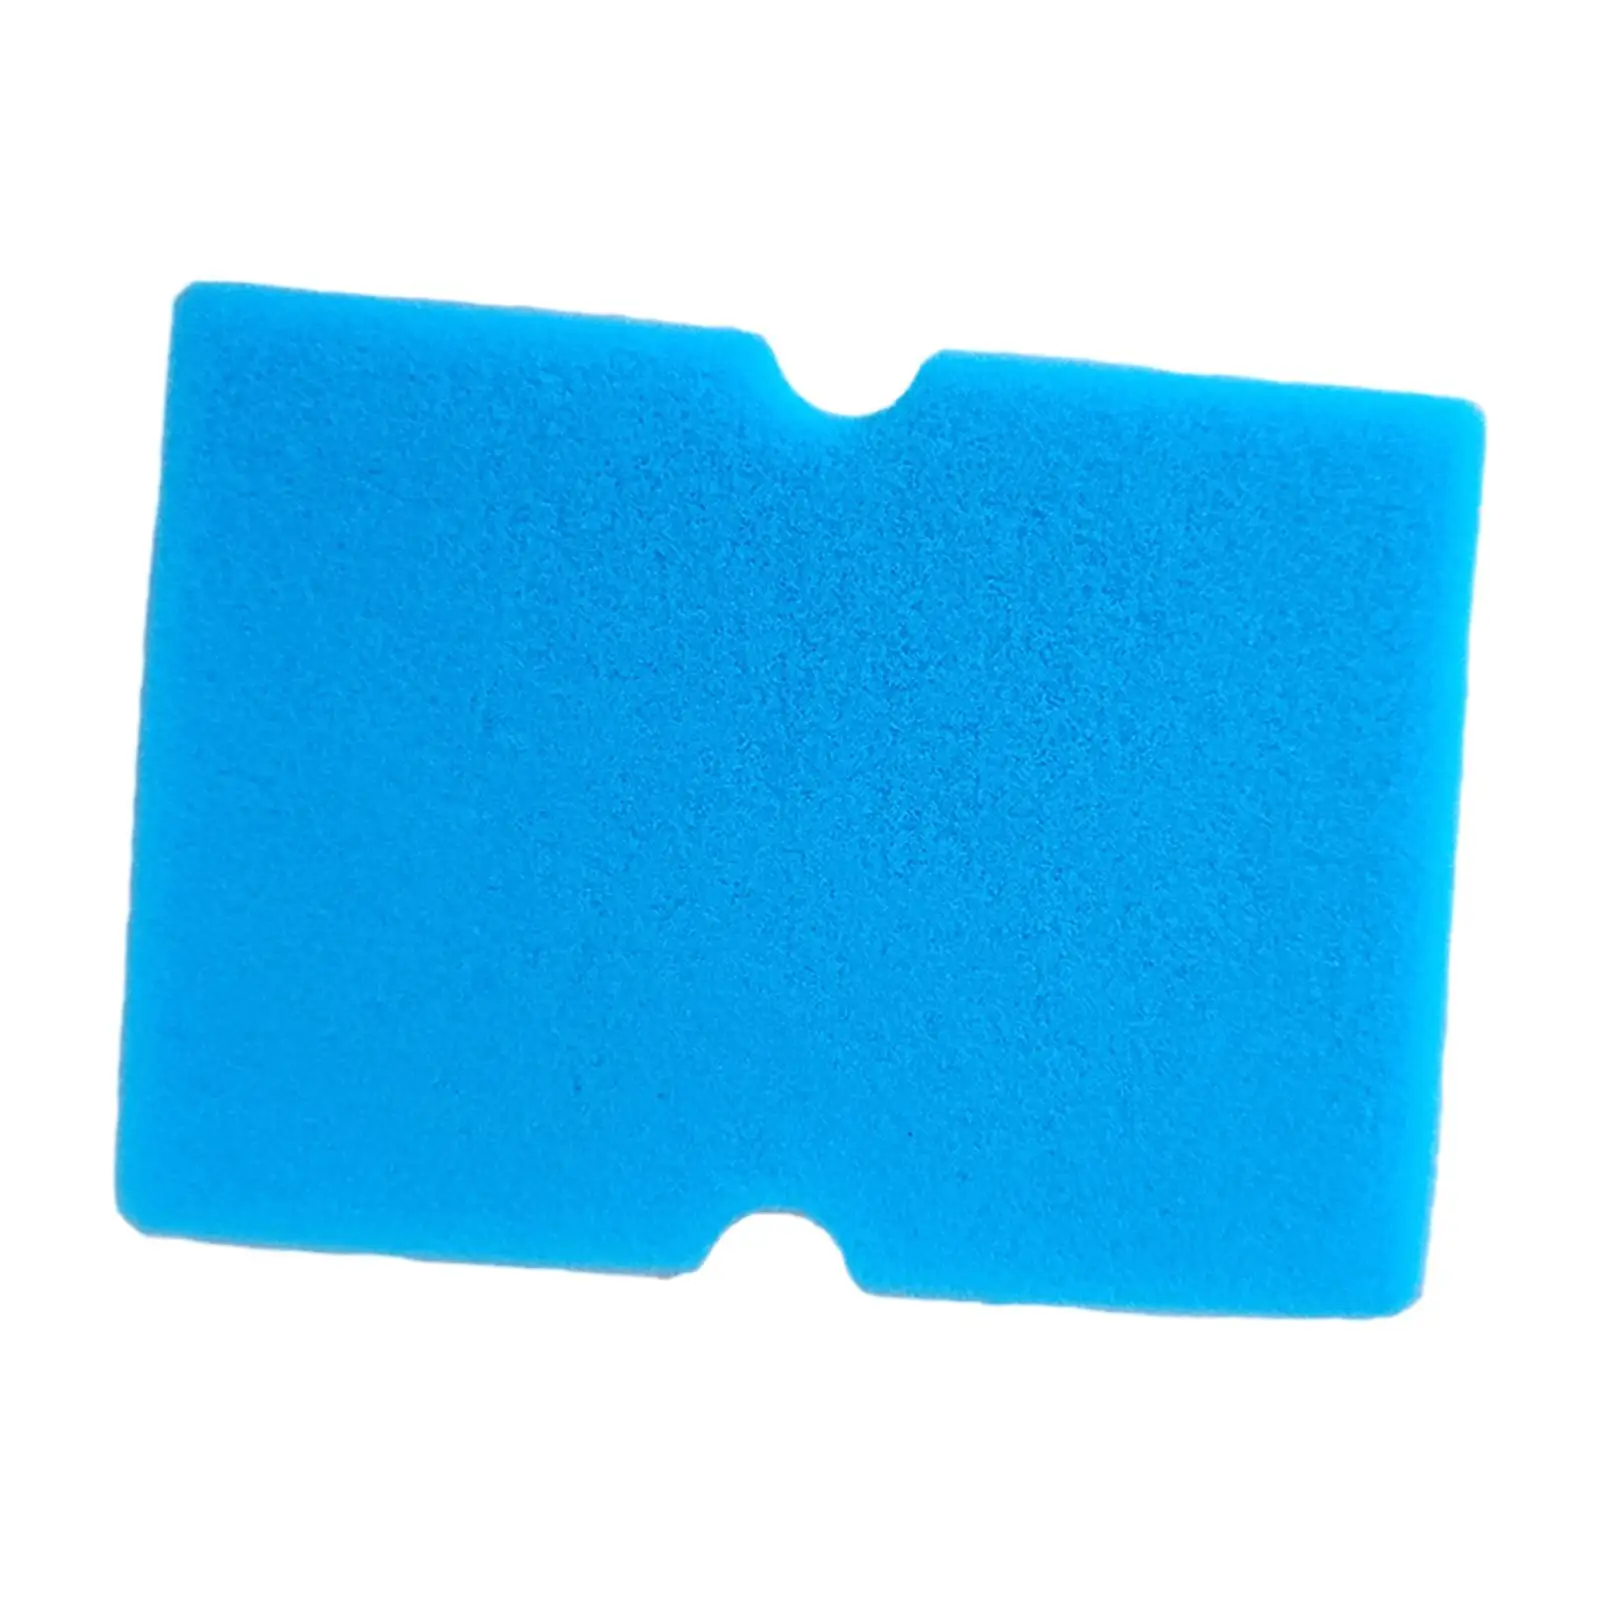 Damp Clean Duster Sponge Multifunctional Large Soft Thick Car Cleaning Accessories Car Wash Sponge for Cars Truck